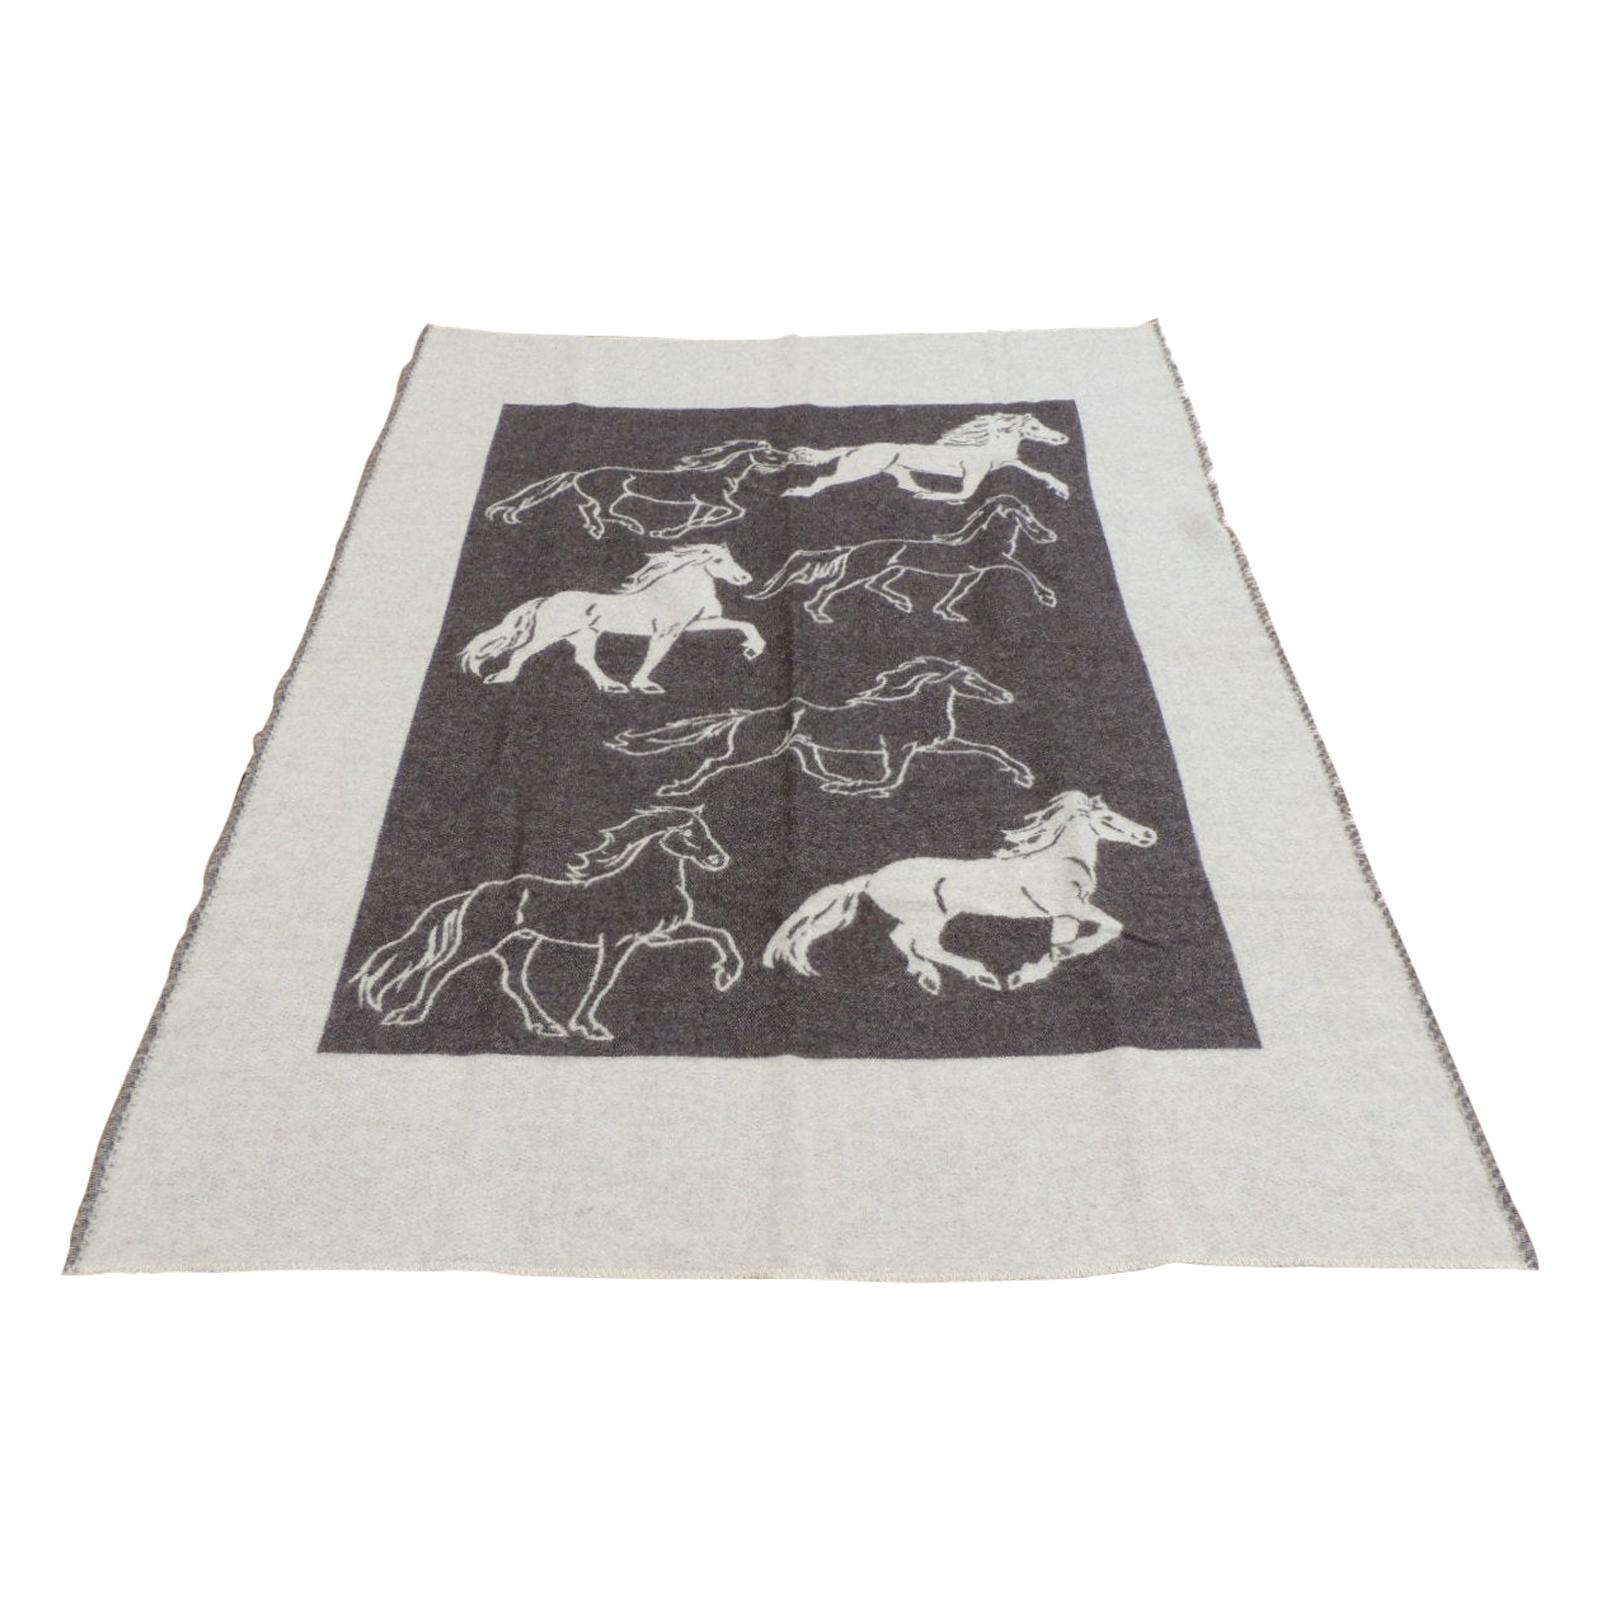 Large Ice Wool Grey and Tan Blanket Depicting Horses